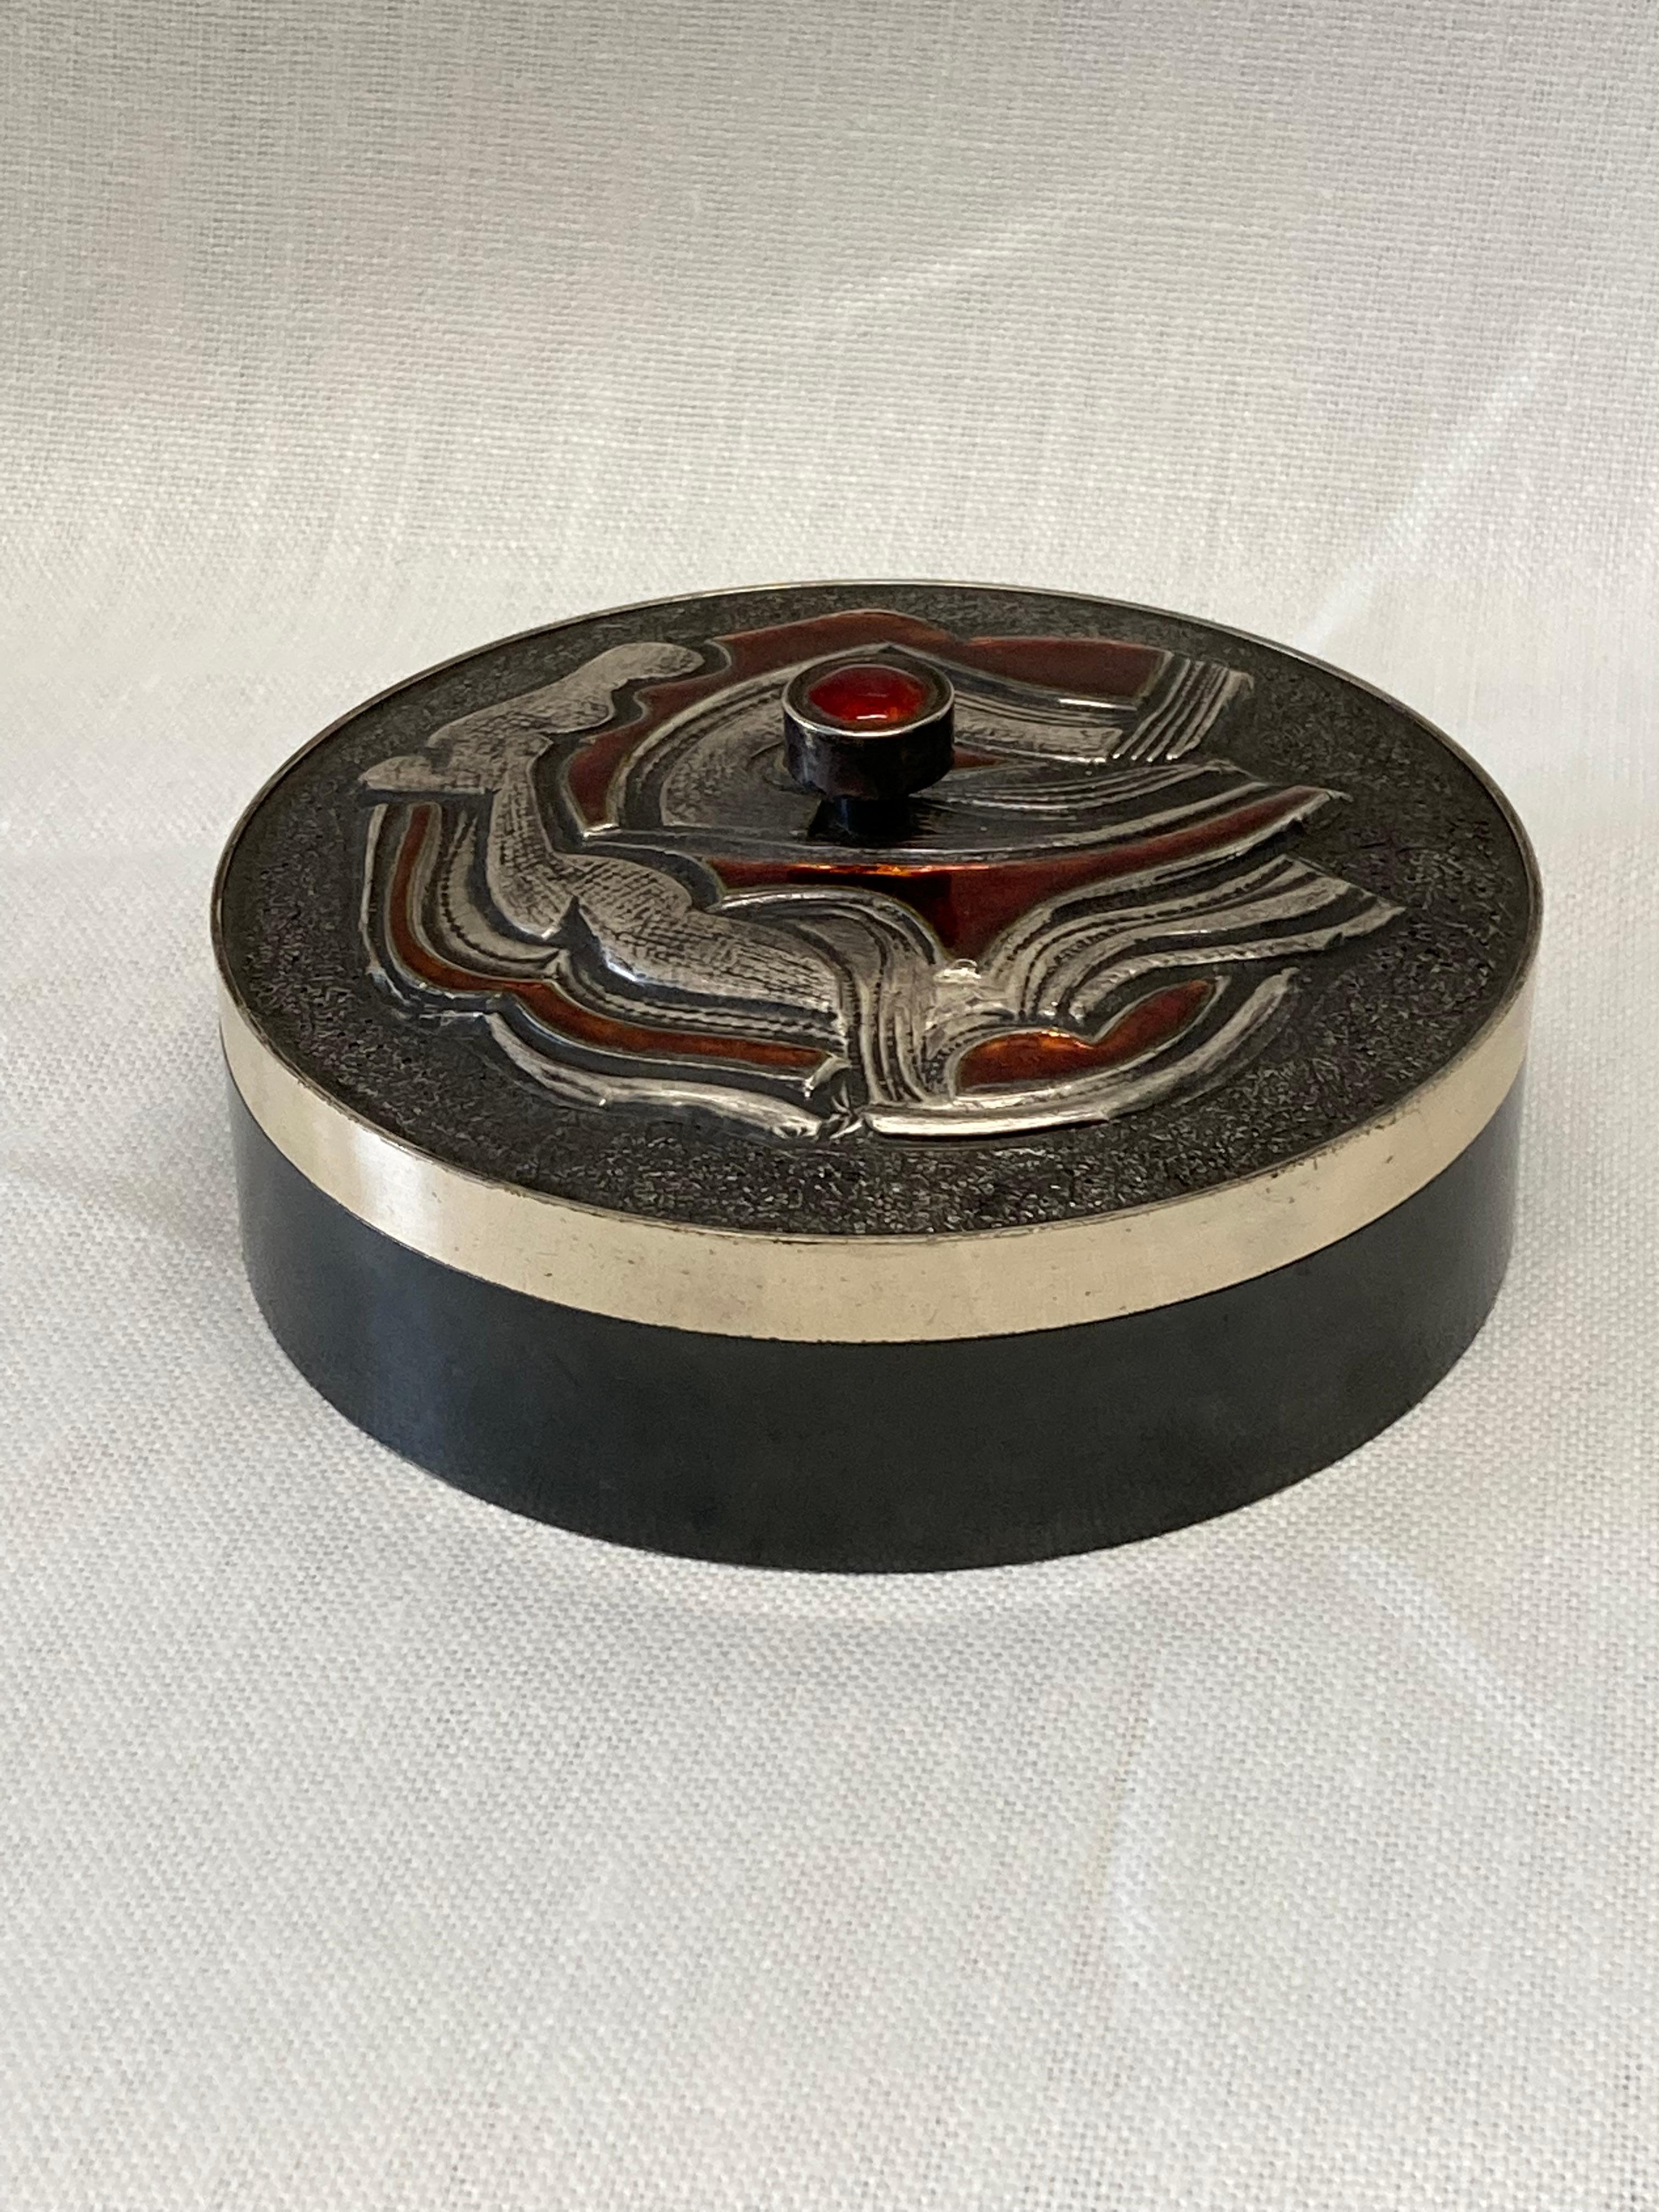 20th Century Studio Del Campo, Brutalist Italian Enamelled Metal Box, Signed and Dated 1983 For Sale